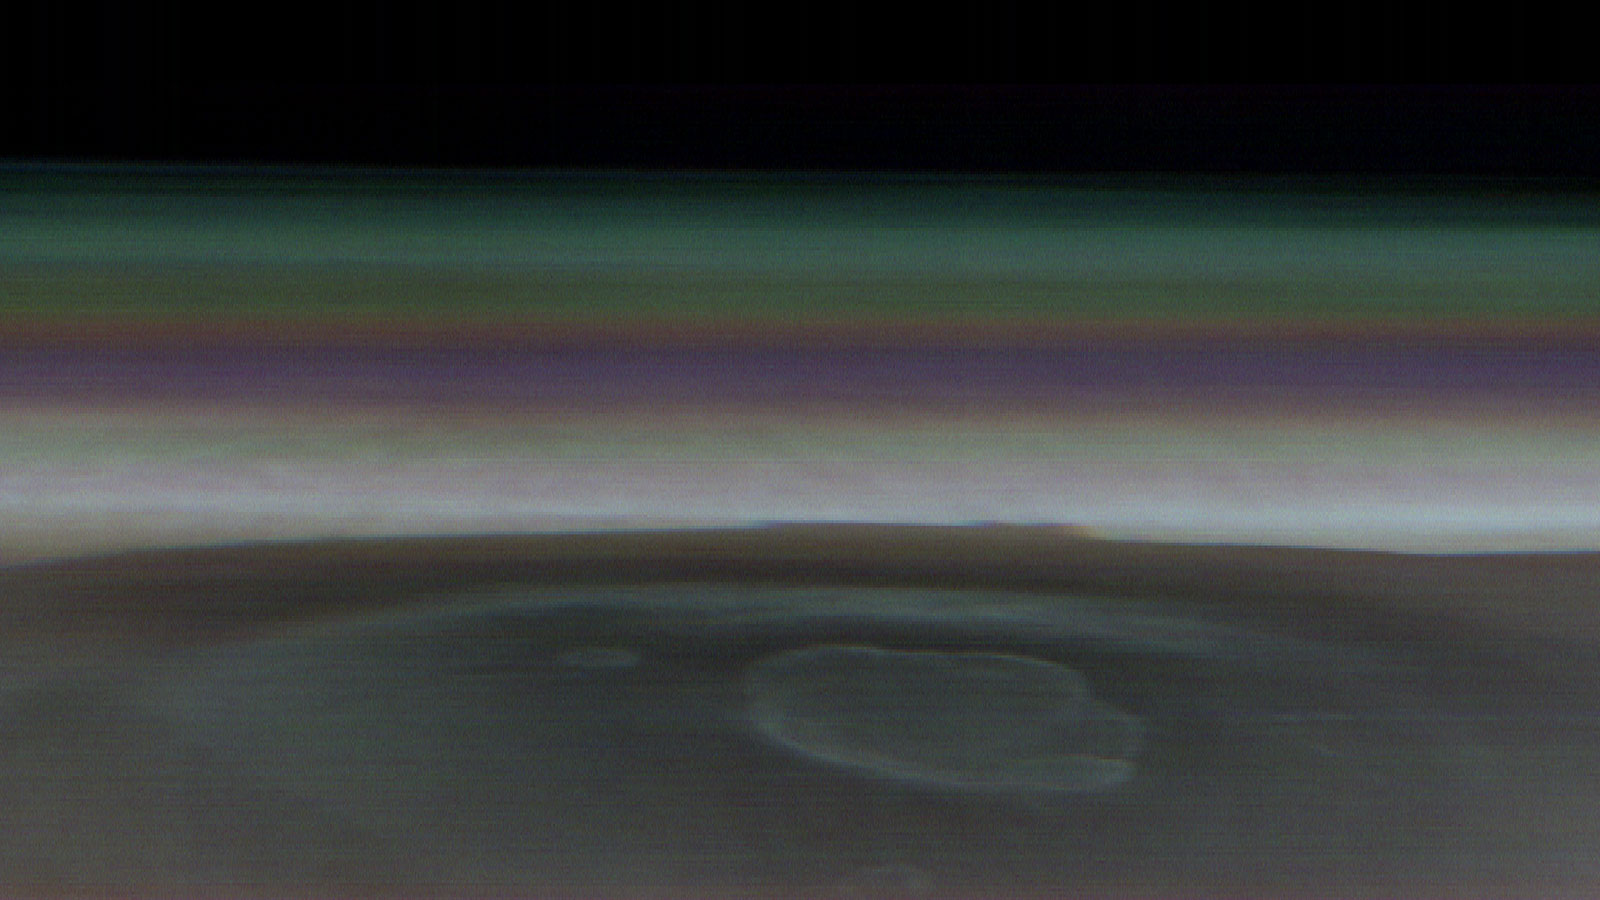 NASA’s 2001 Mars Odyssey orbiter captured this single image of Olympus Mons, the tallest volcano in the solar system, on March 11, 2024. Besides providing an unprecedented view of the volcano, the image helps scientists study different layers of material in the atmosphere, including clouds and dust.